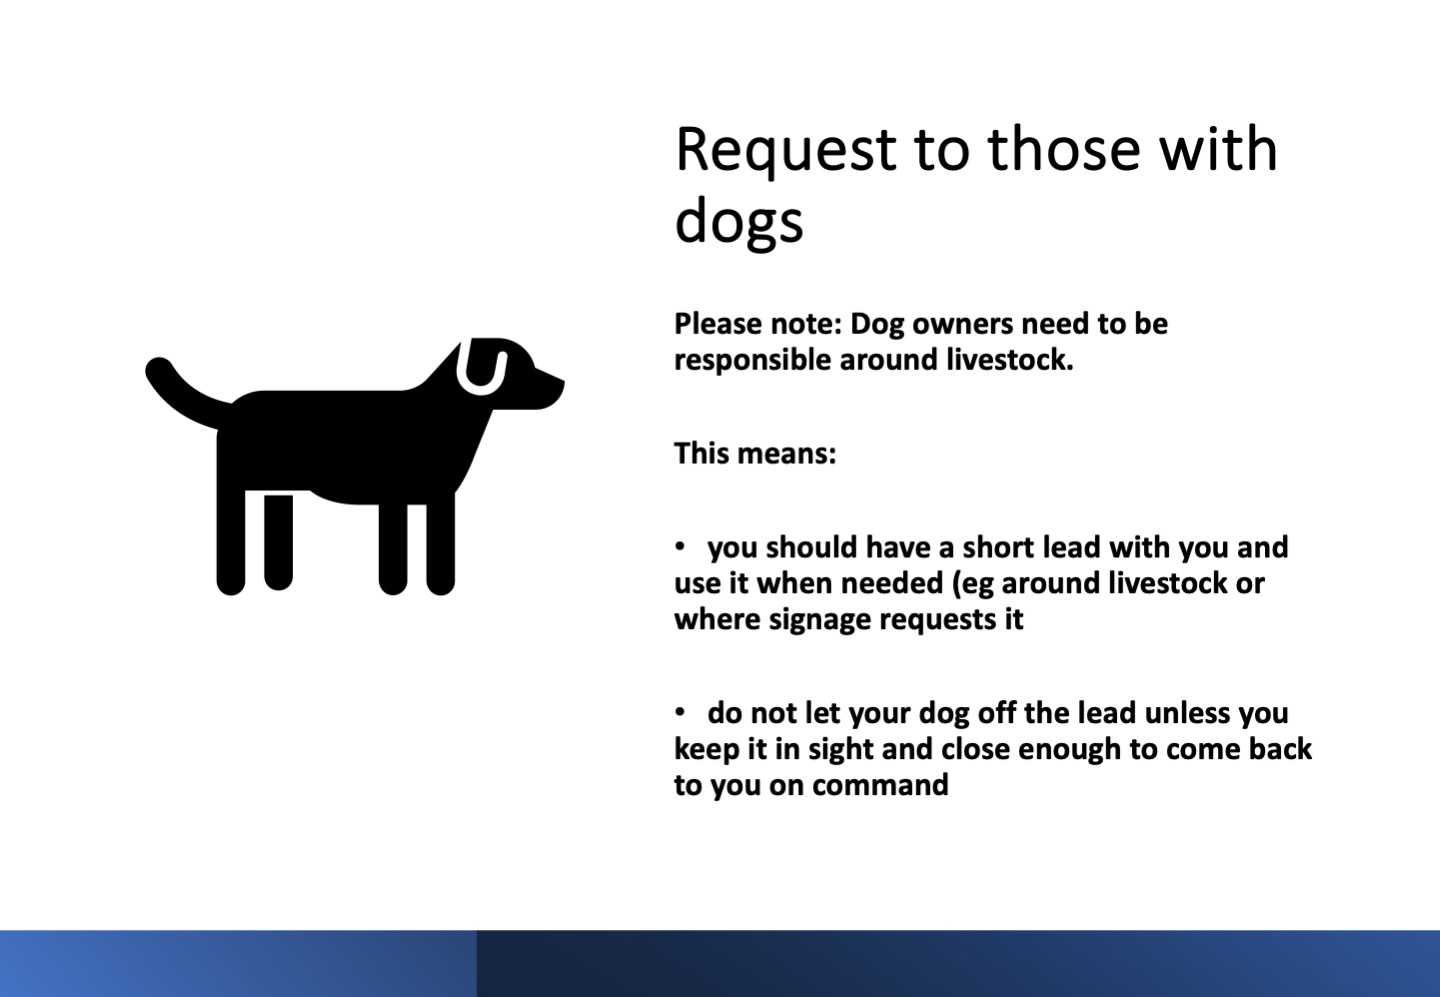 Request to those with dogs